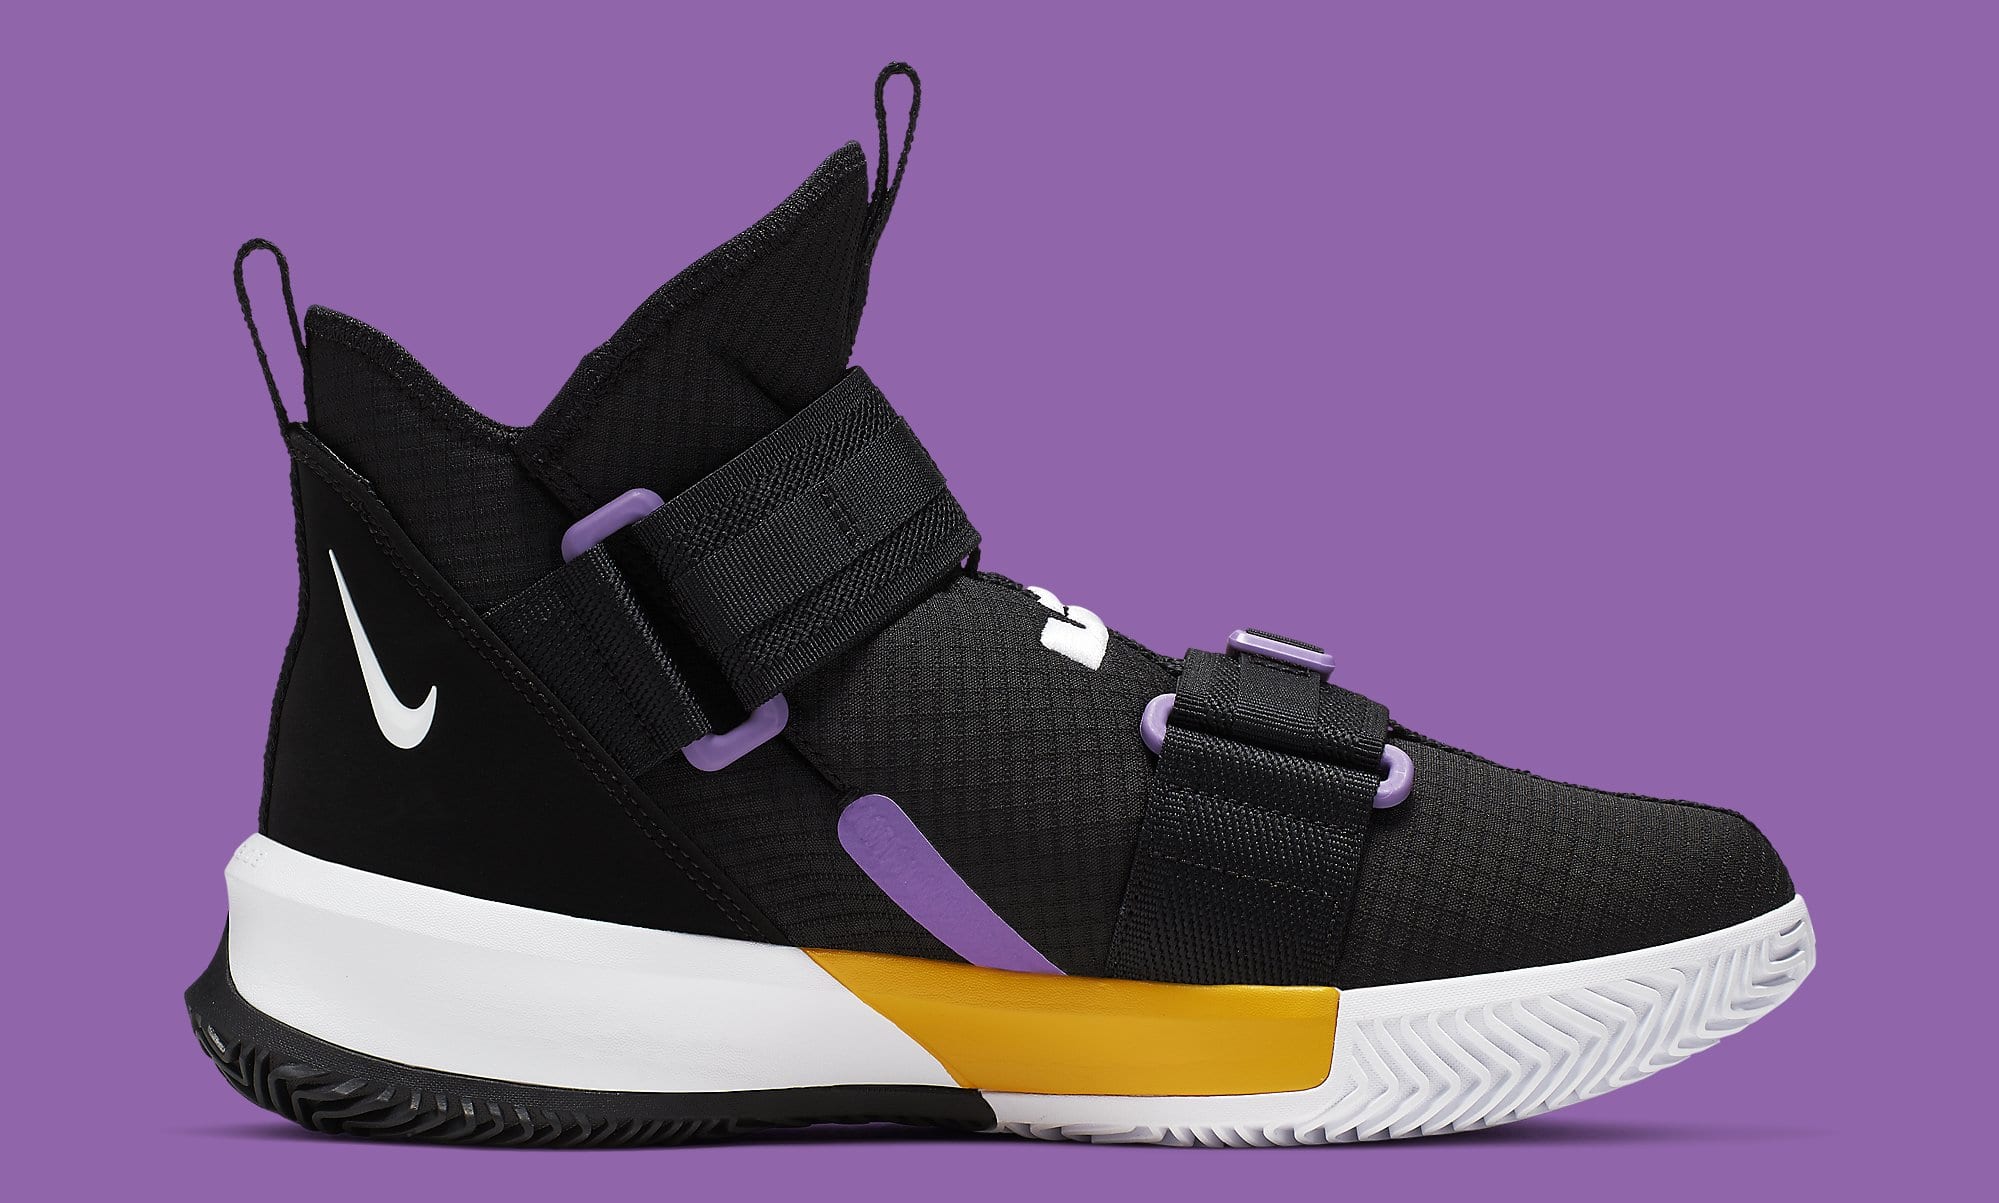 Nike LeBron Soldier 13 Lakers Release Date AR4228-004 Medial